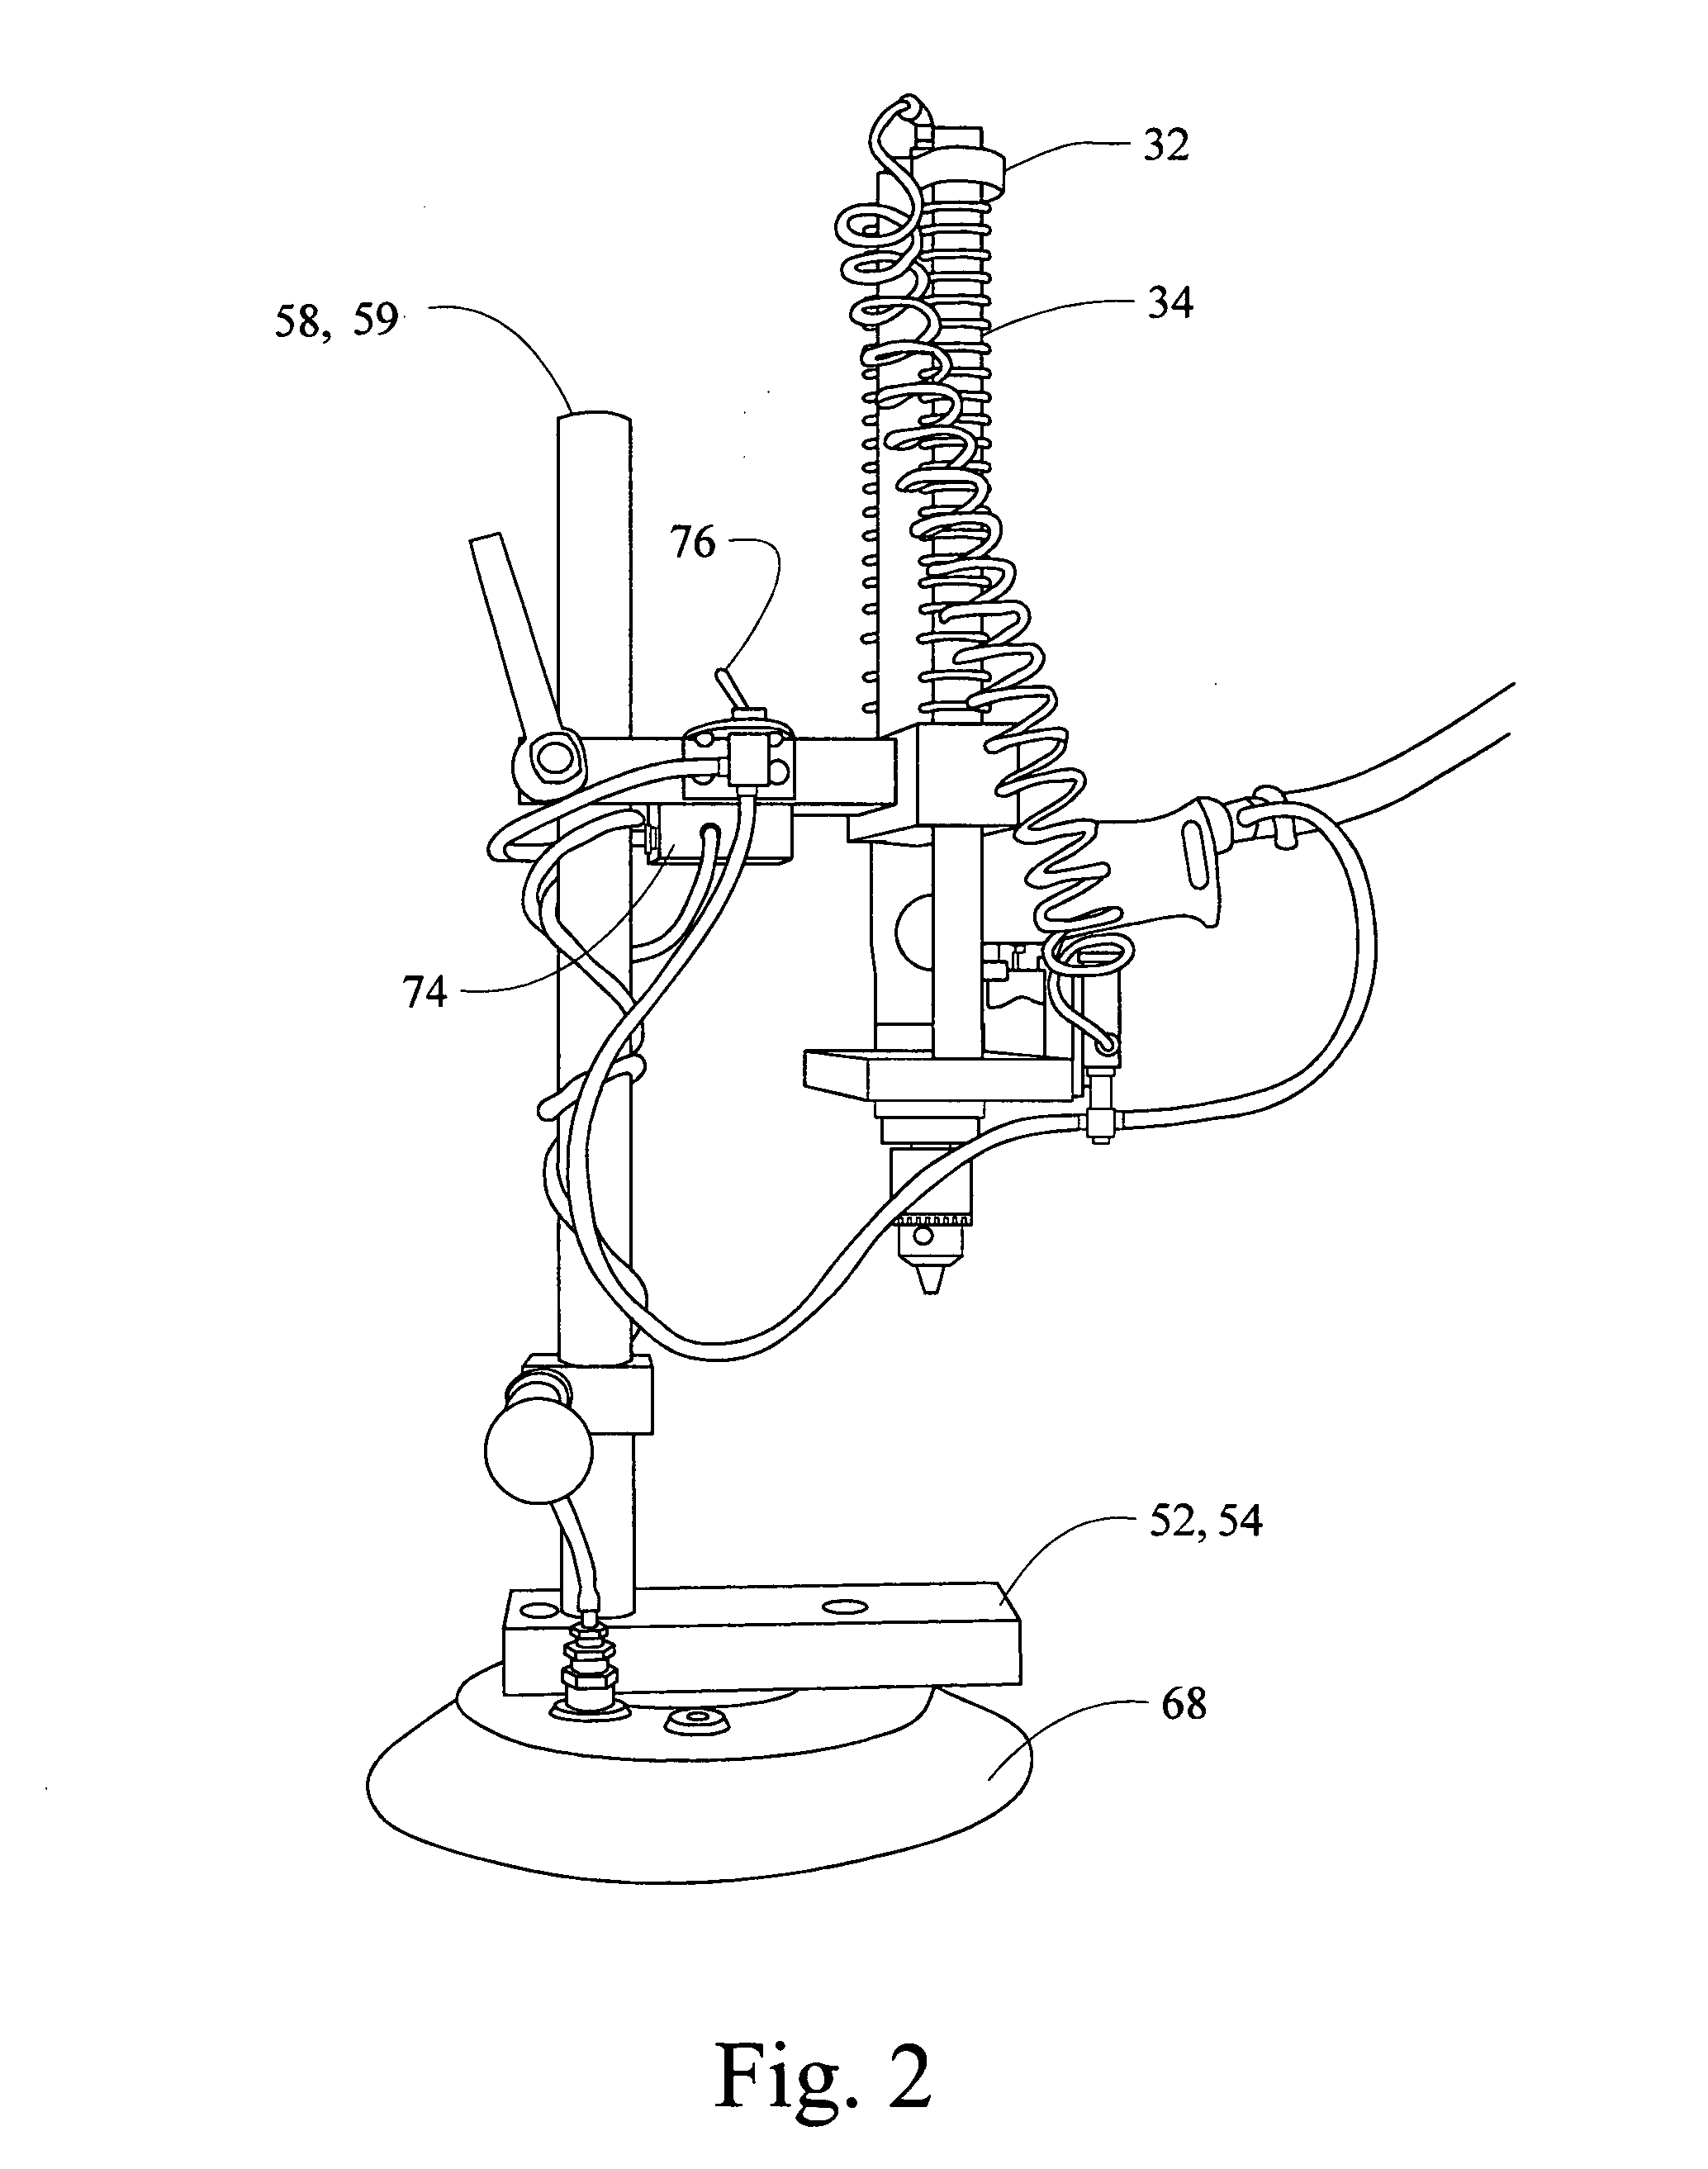 Power assisted drill press